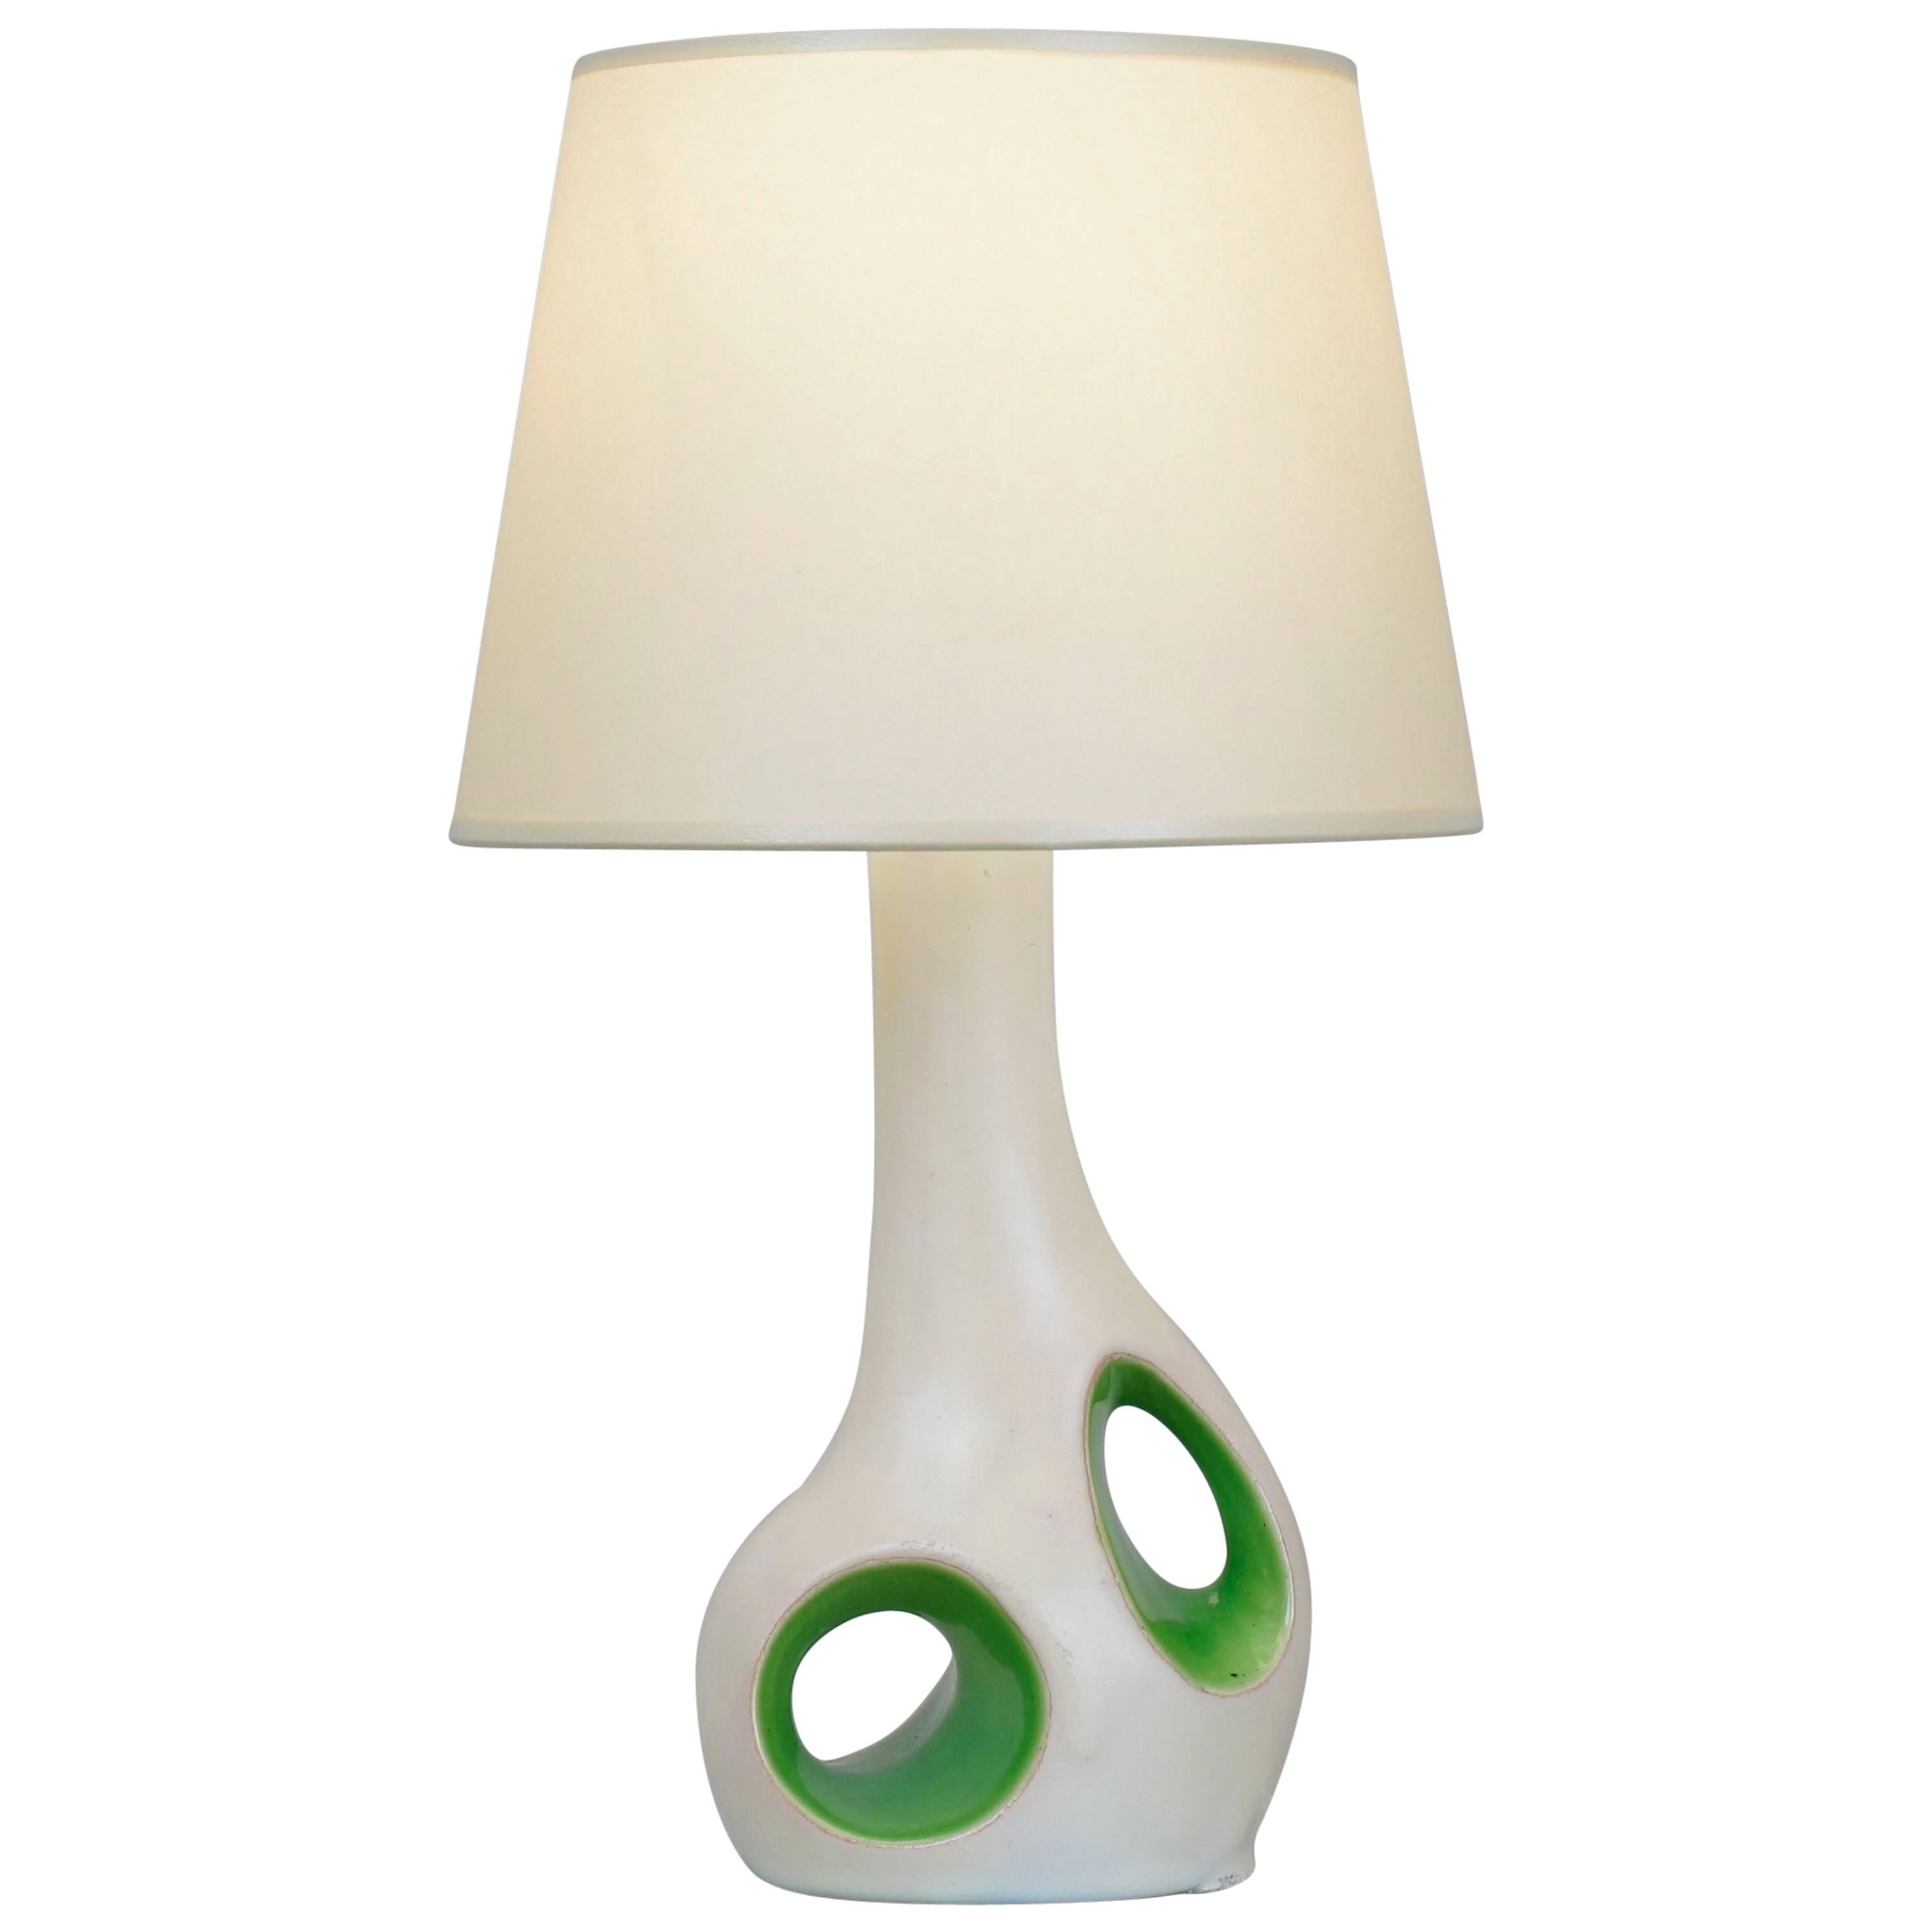 1970 White and Green Ceramic Table Lamp For Sale